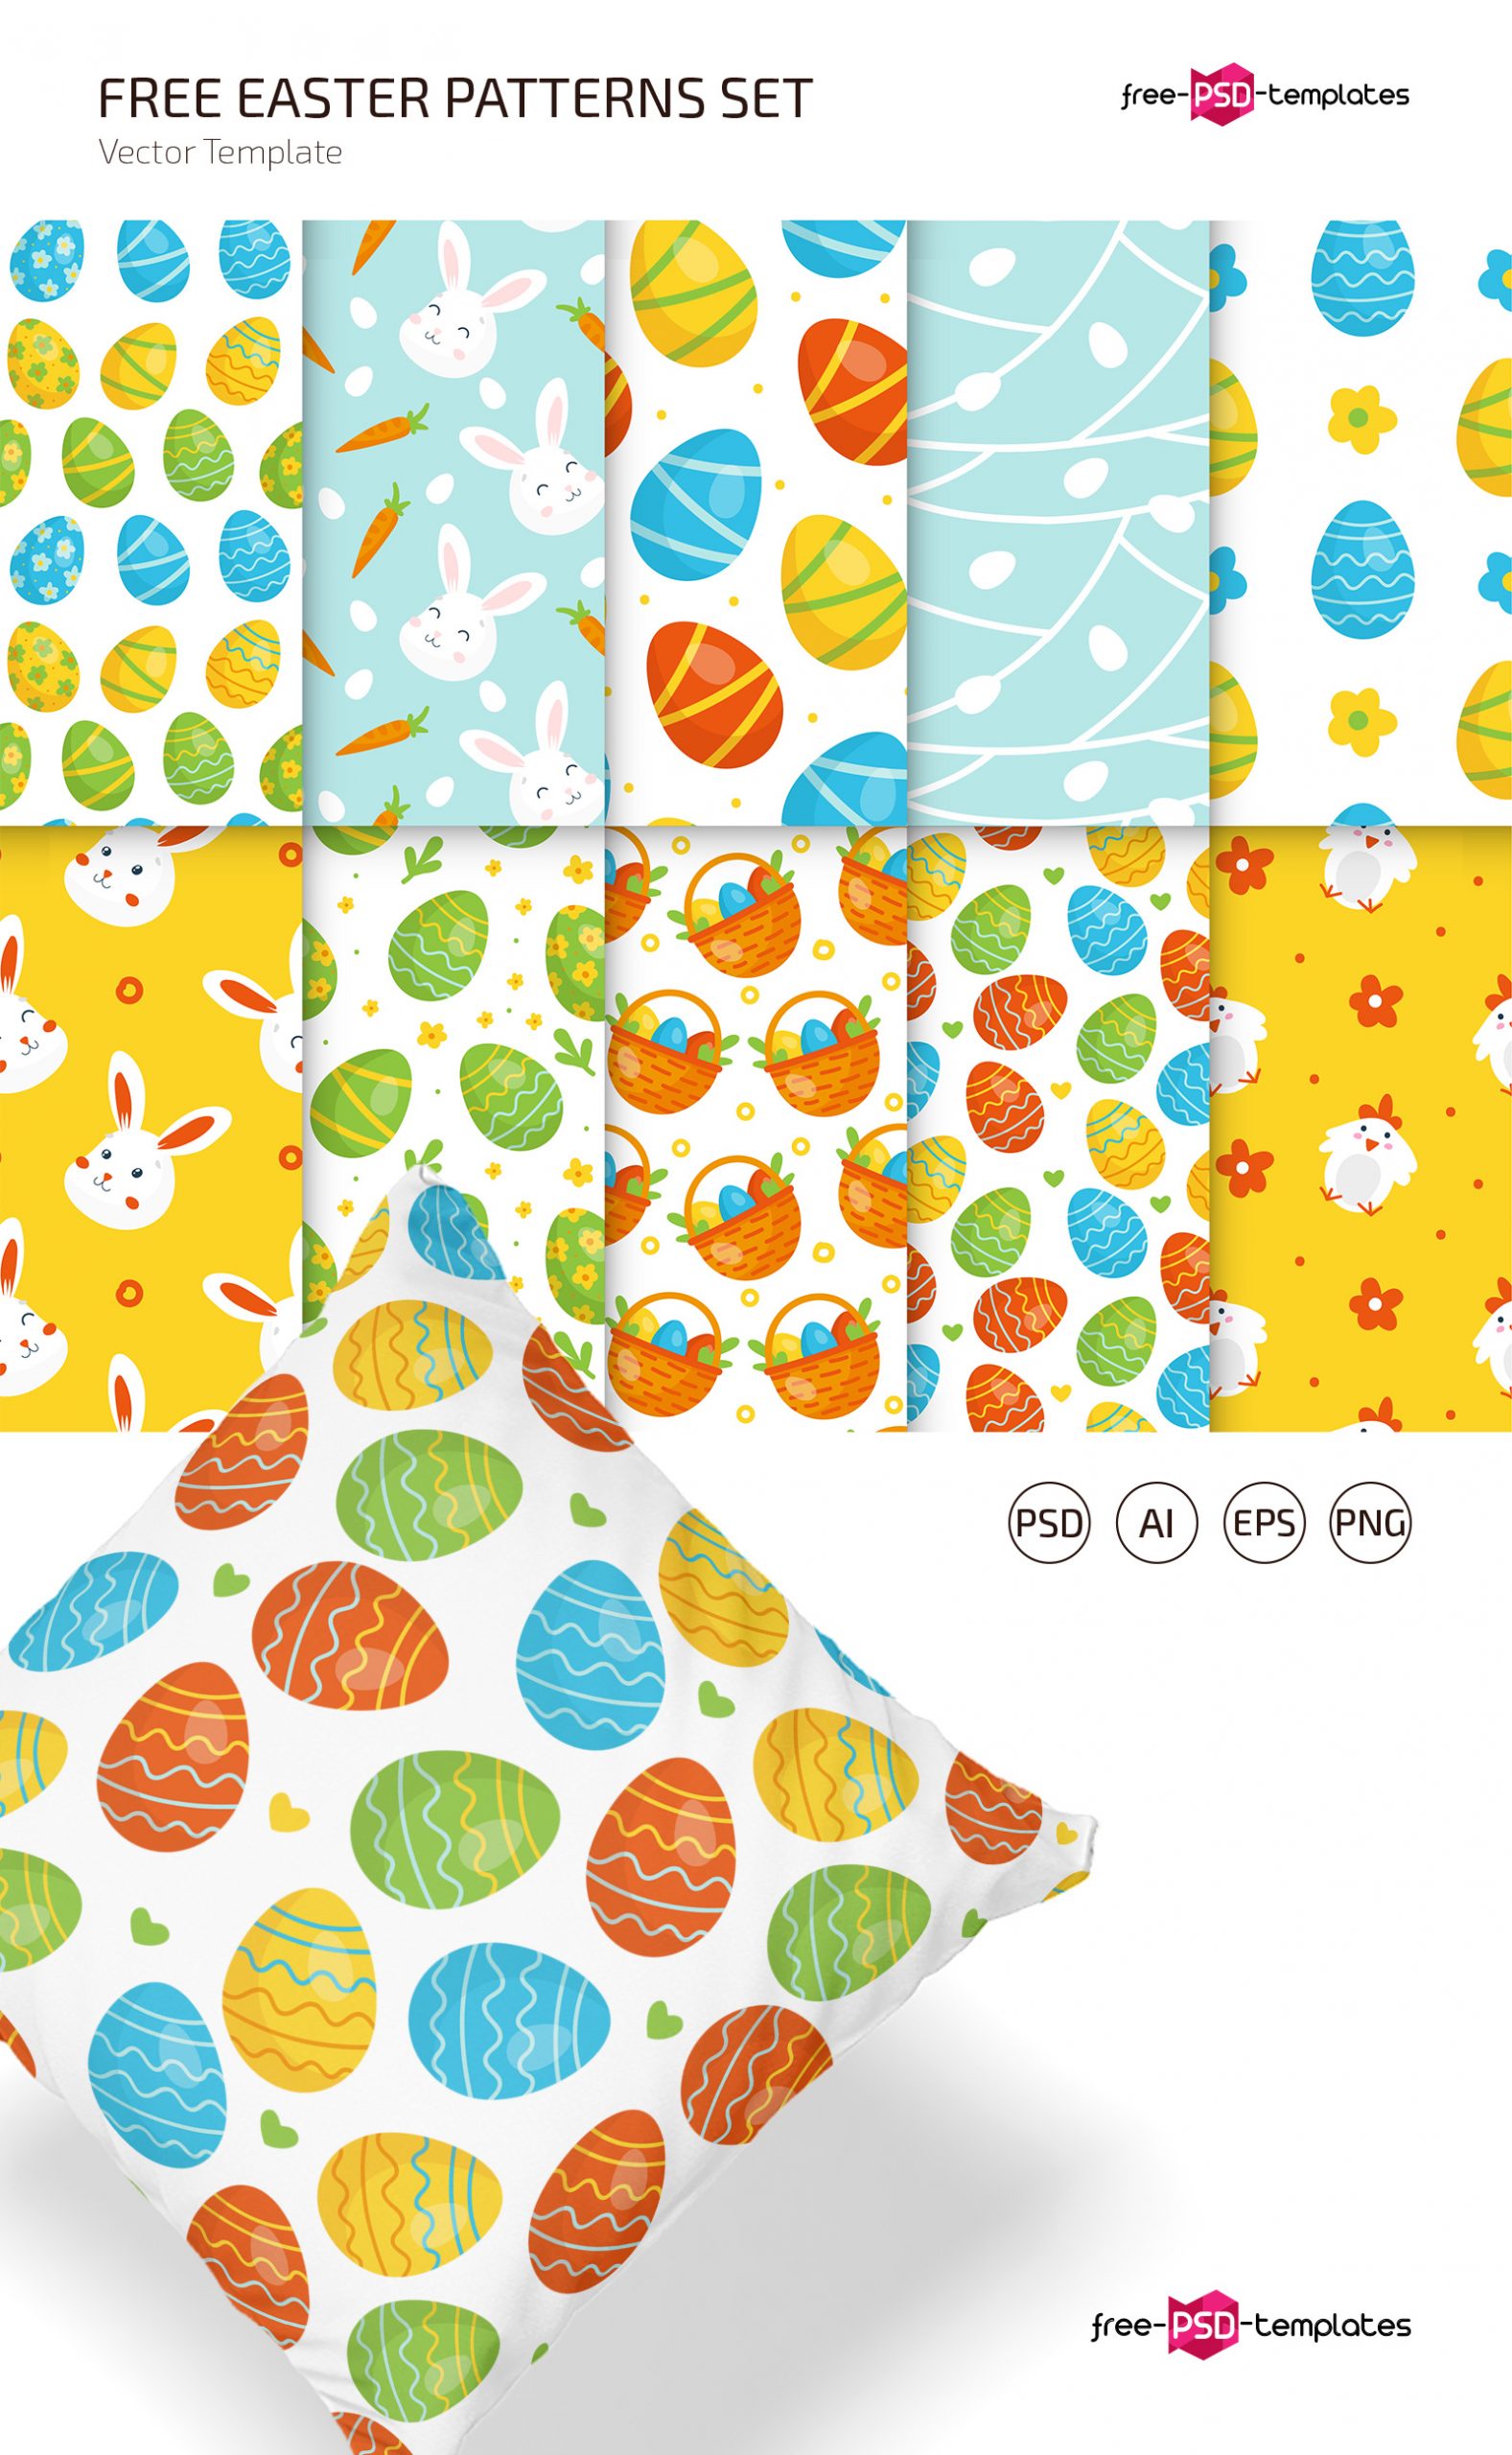 Free Easter Patterns